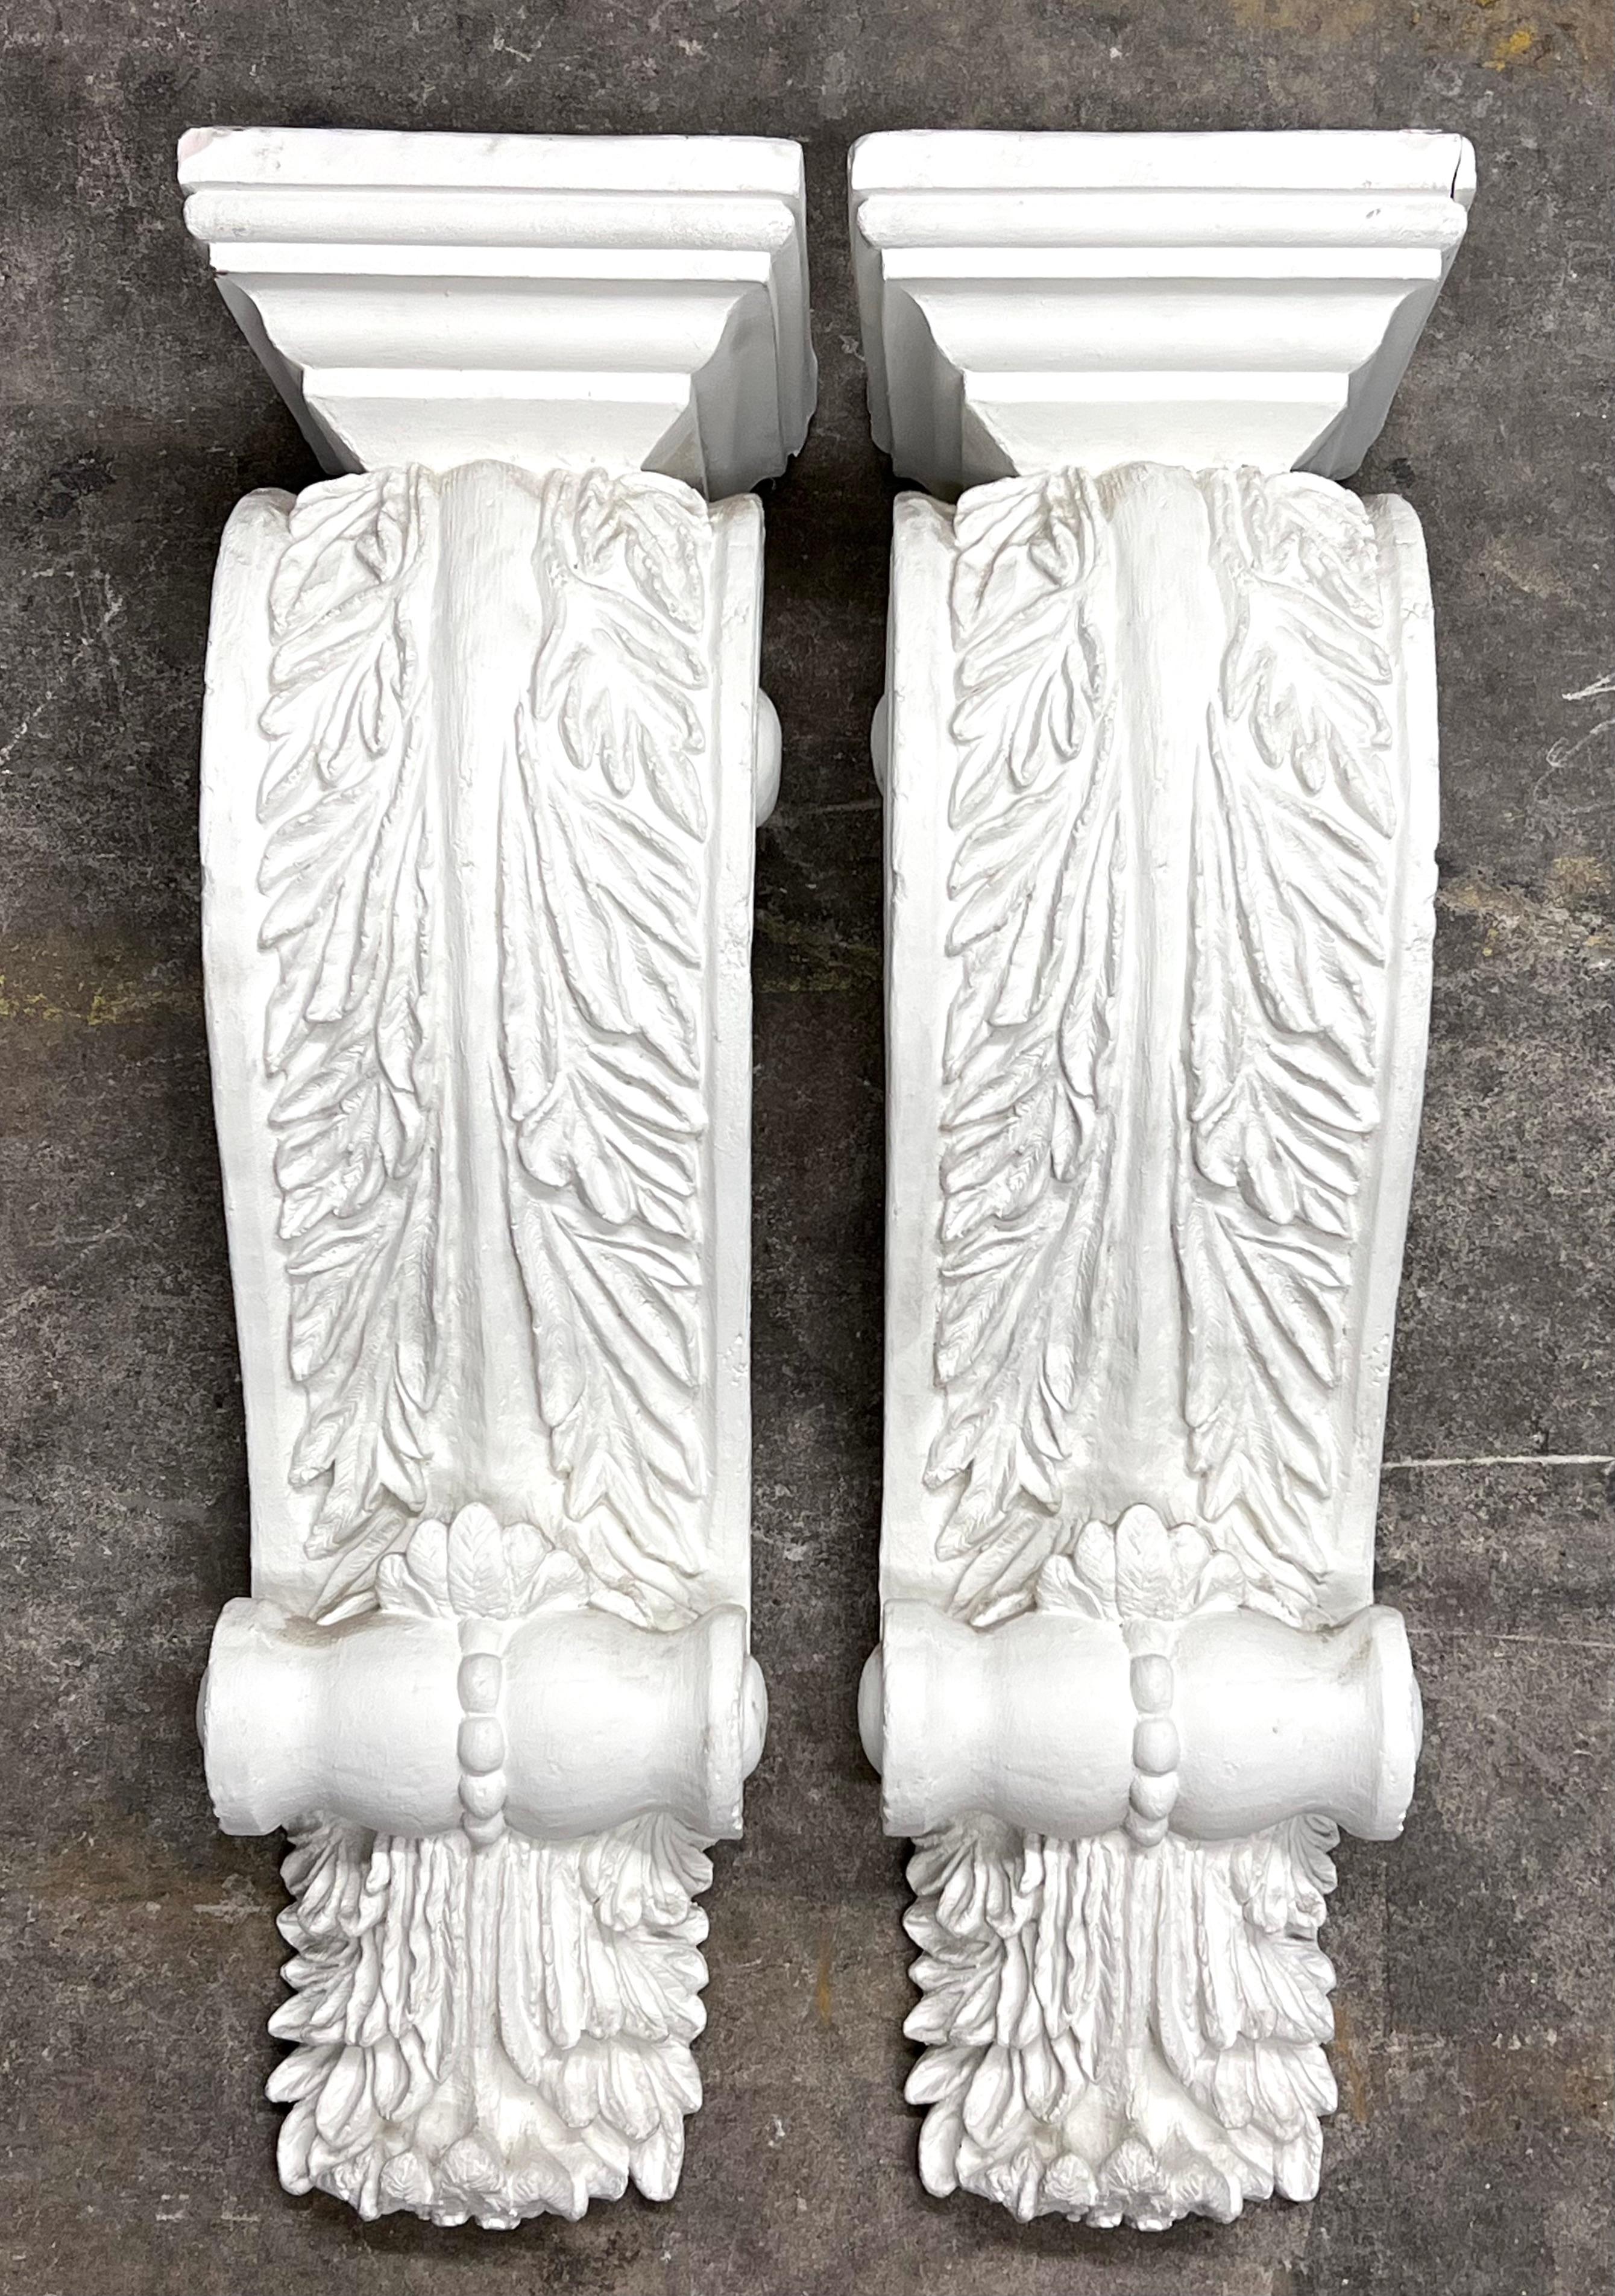 A pair of Renaissance Revival Plaster Corbels. Both look to have been pulled from an architectural setting. Each corbel has an installed metal bracket on the rear for hanging installation. The tops also have holes in which may have housed lights?